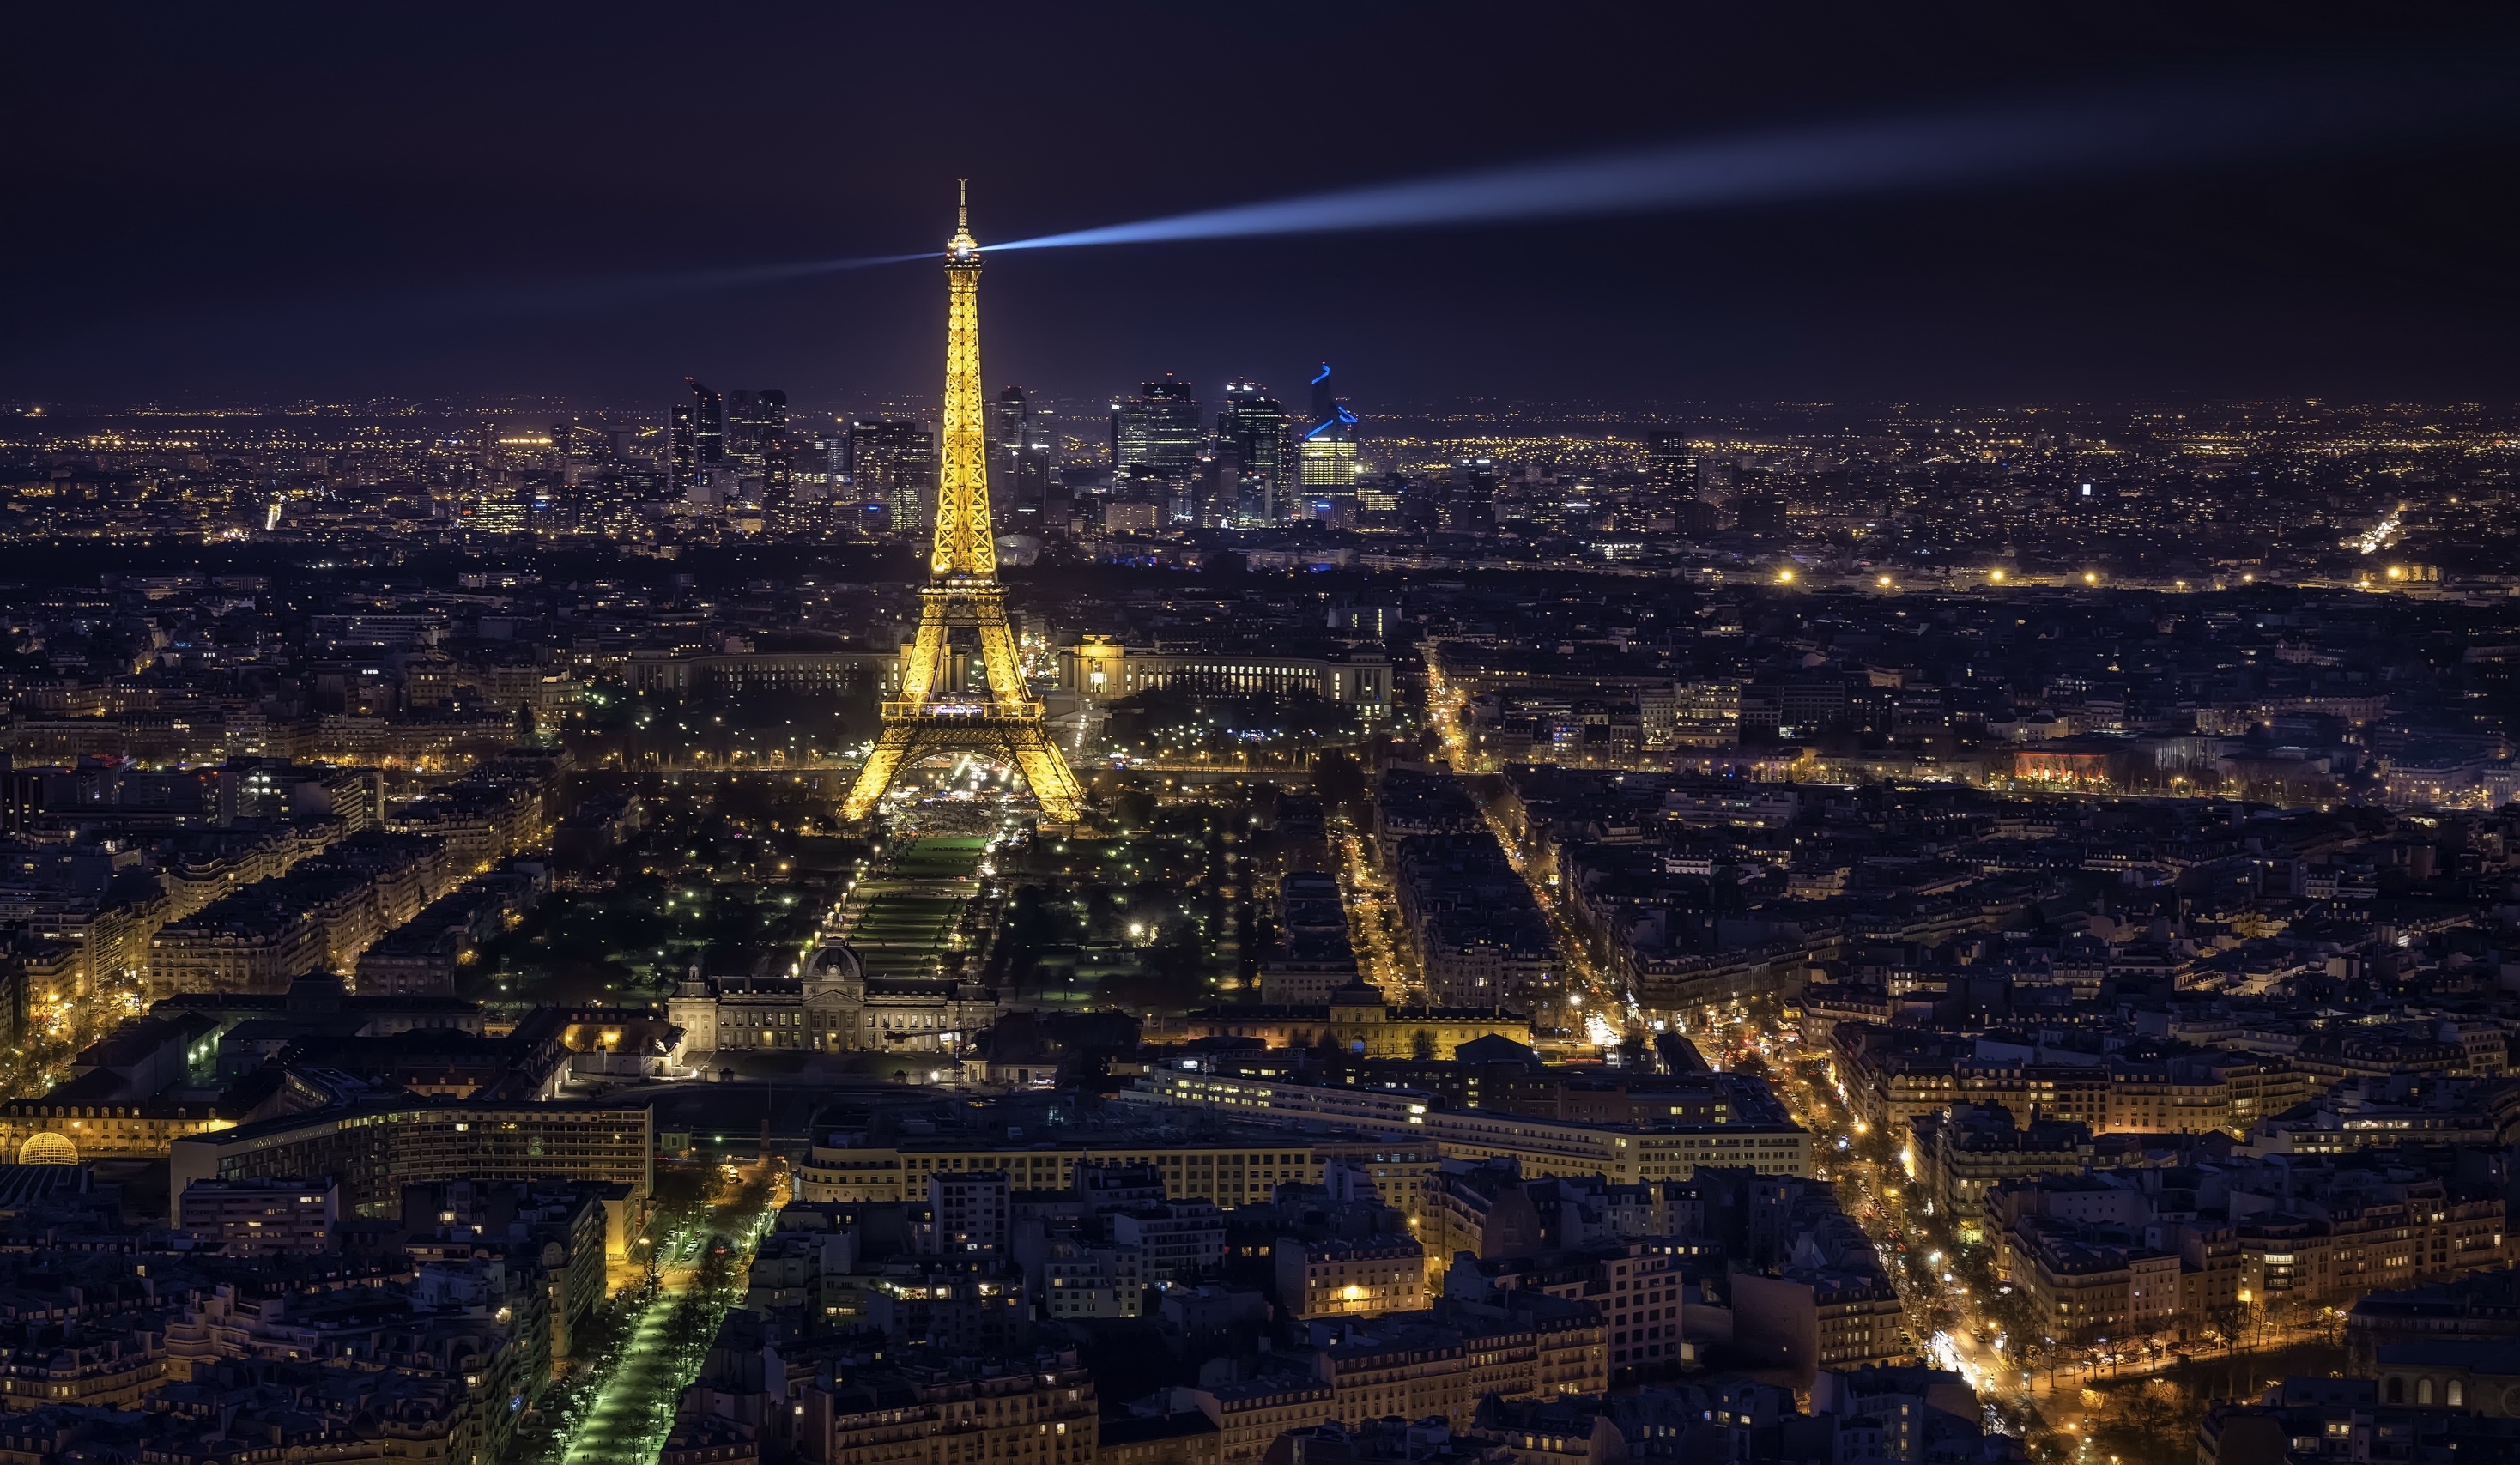 Eiffel Tower At Night Photos Download The BEST Free Eiffel Tower At Night  Stock Photos  HD Images